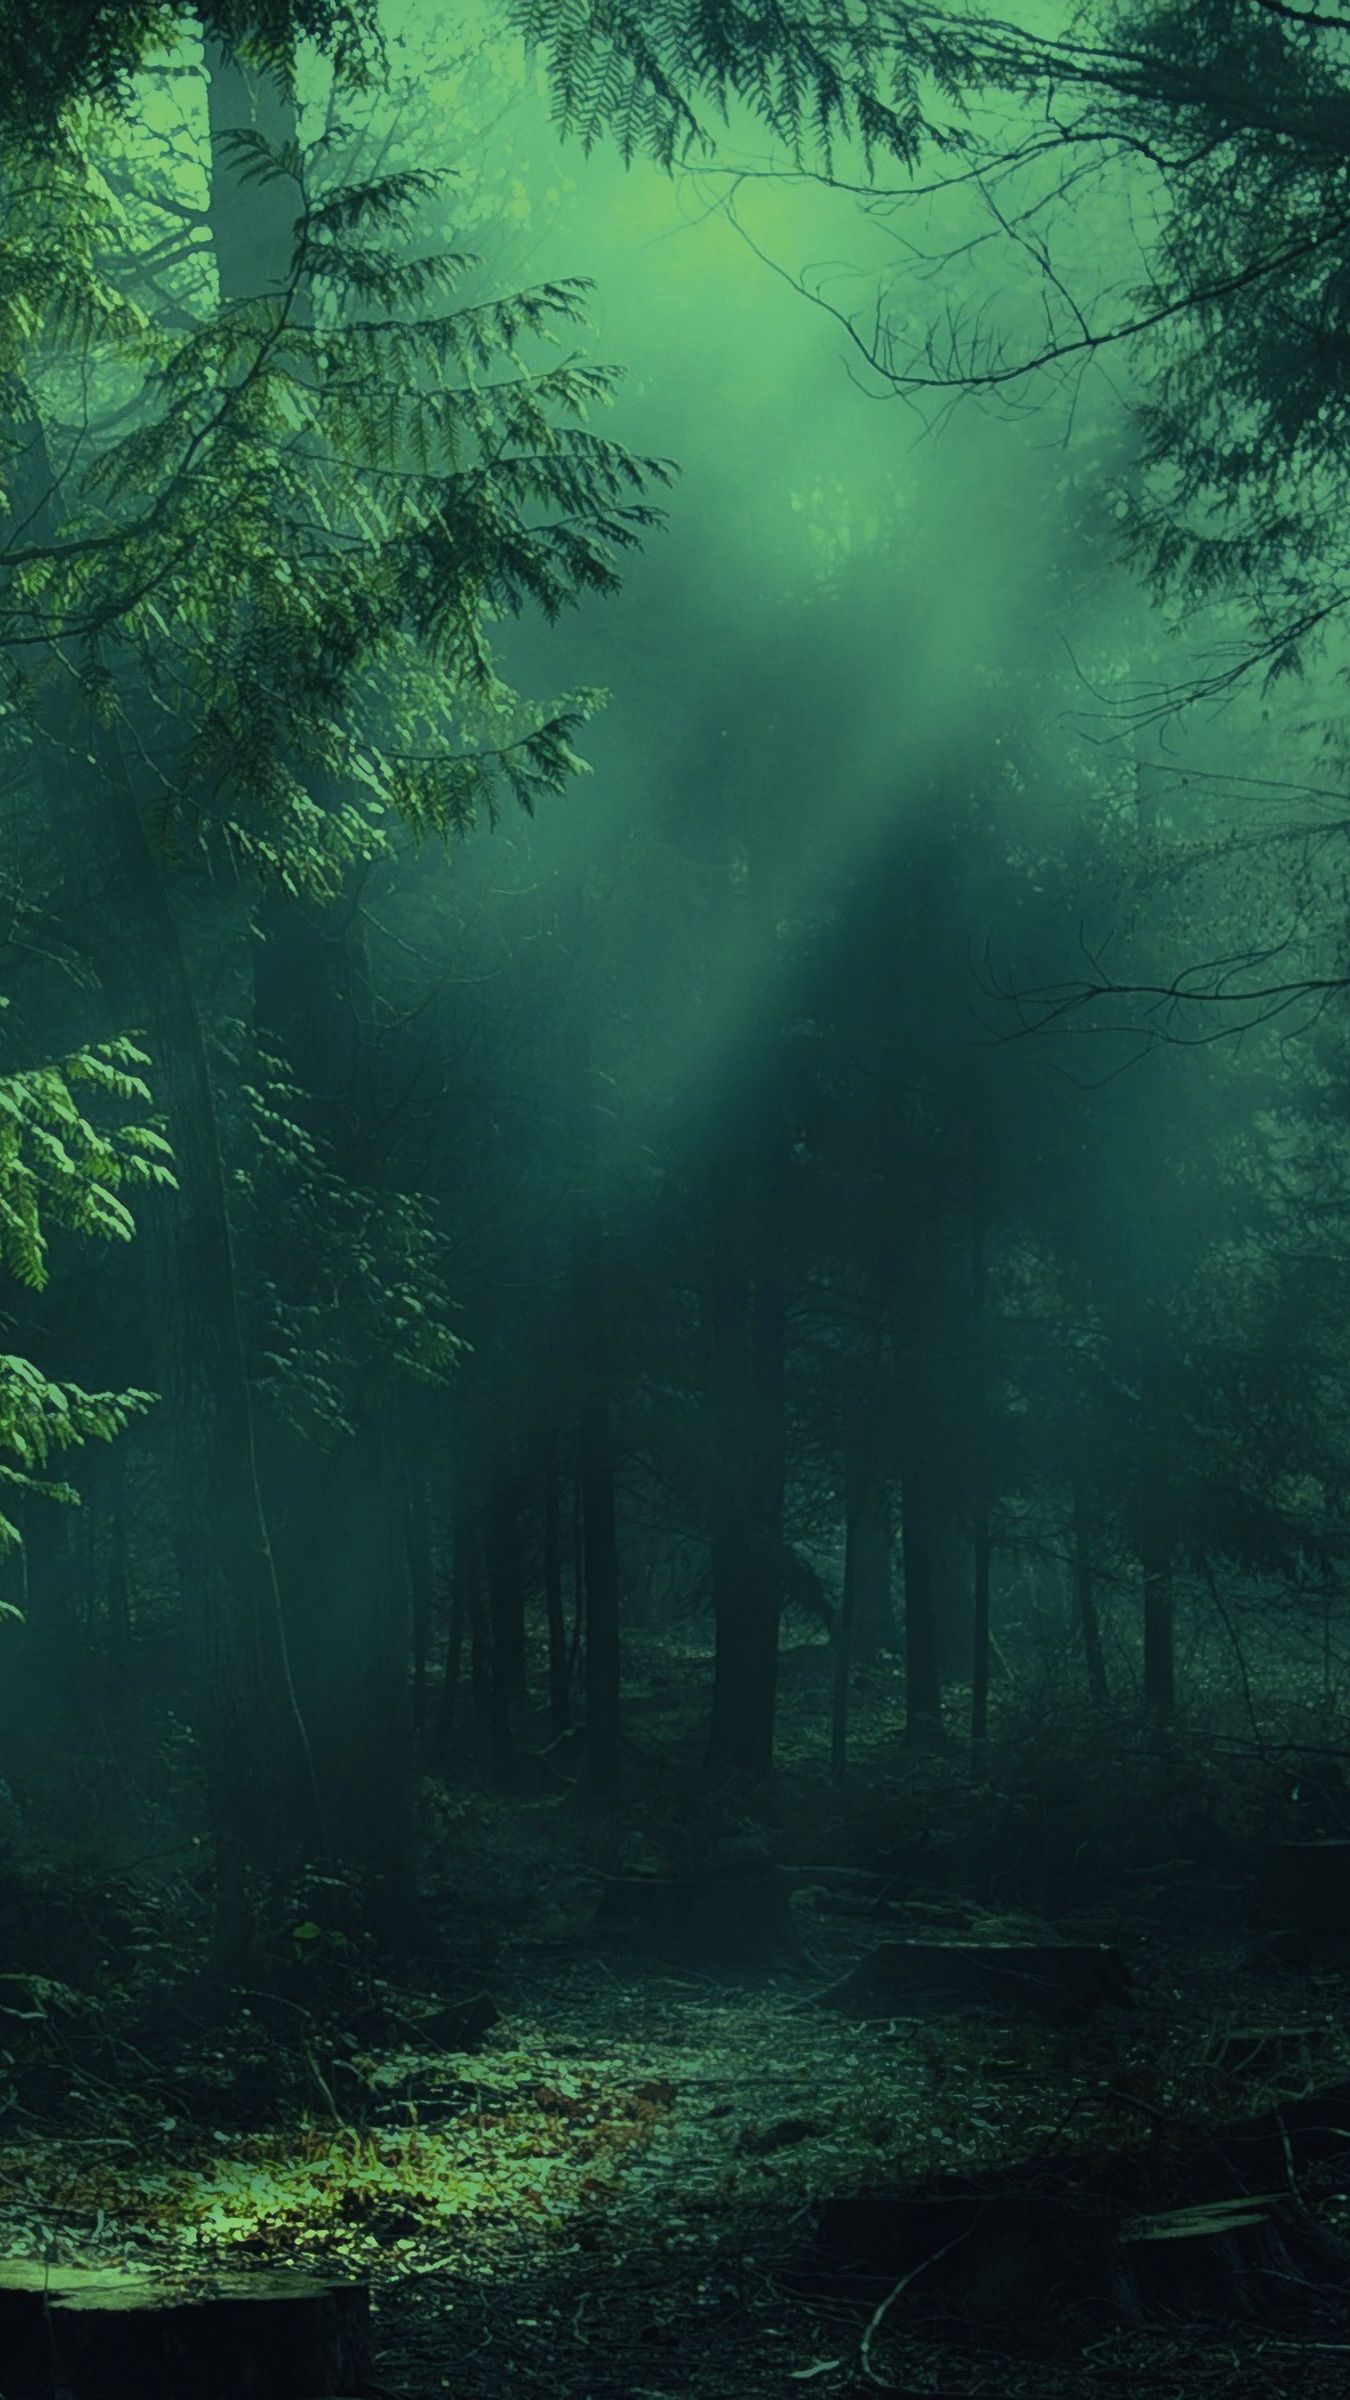 IPhone wallpaper of a forest with a ray of light shining through the trees. - Forest, fog, foggy forest